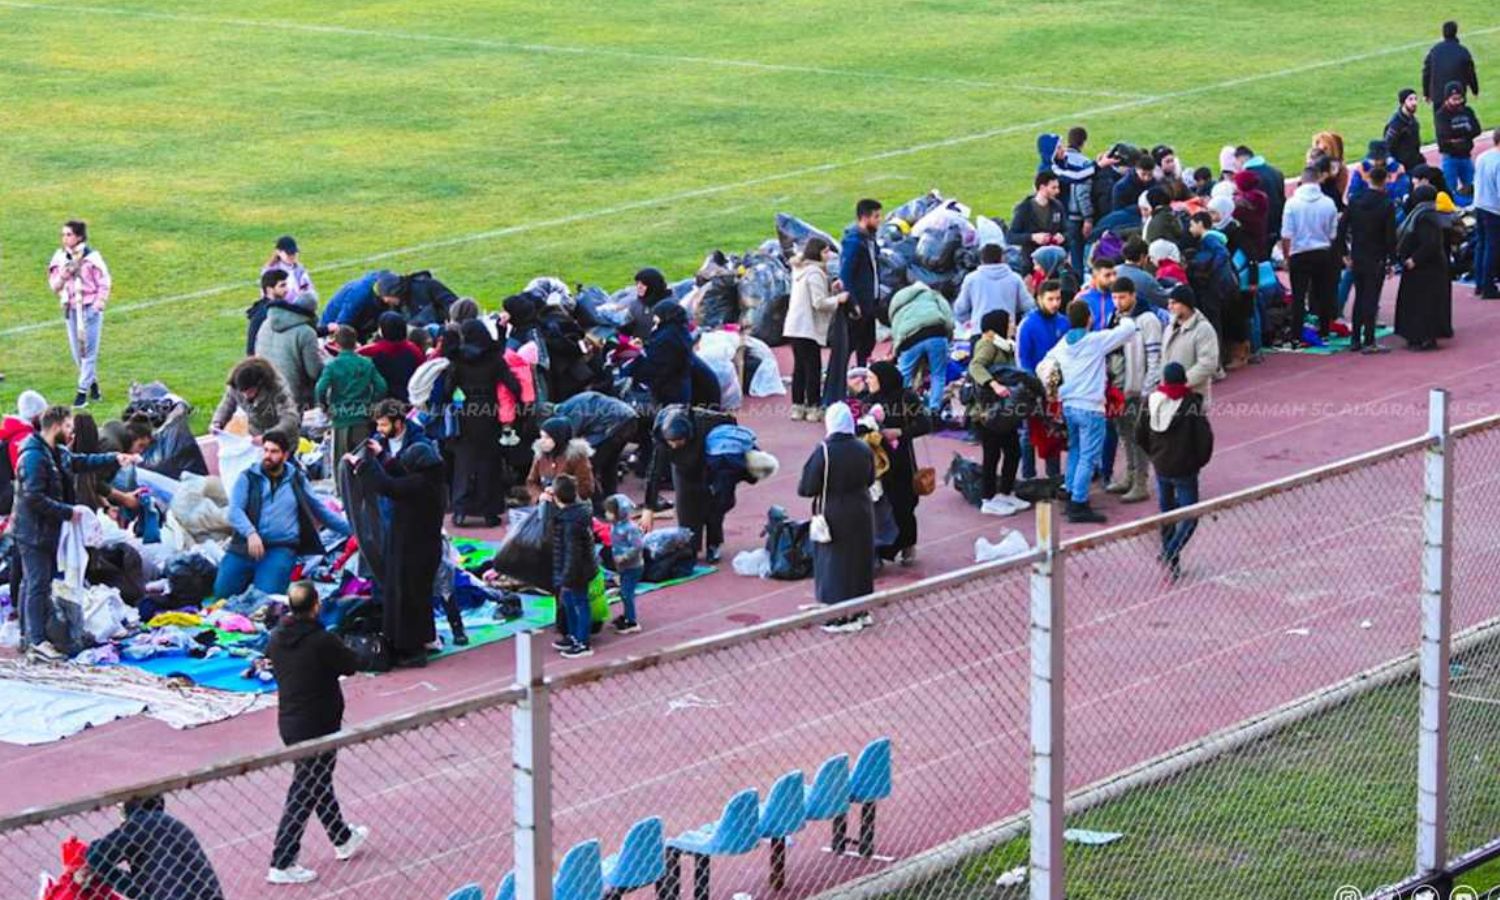 The distribution of aid to the affected people who sought refuge in the al-Hamdaniya football stadium in Aleppo following an earthquake that struck the region - February 9, 2023 (Al-Karamah SC Football Club)